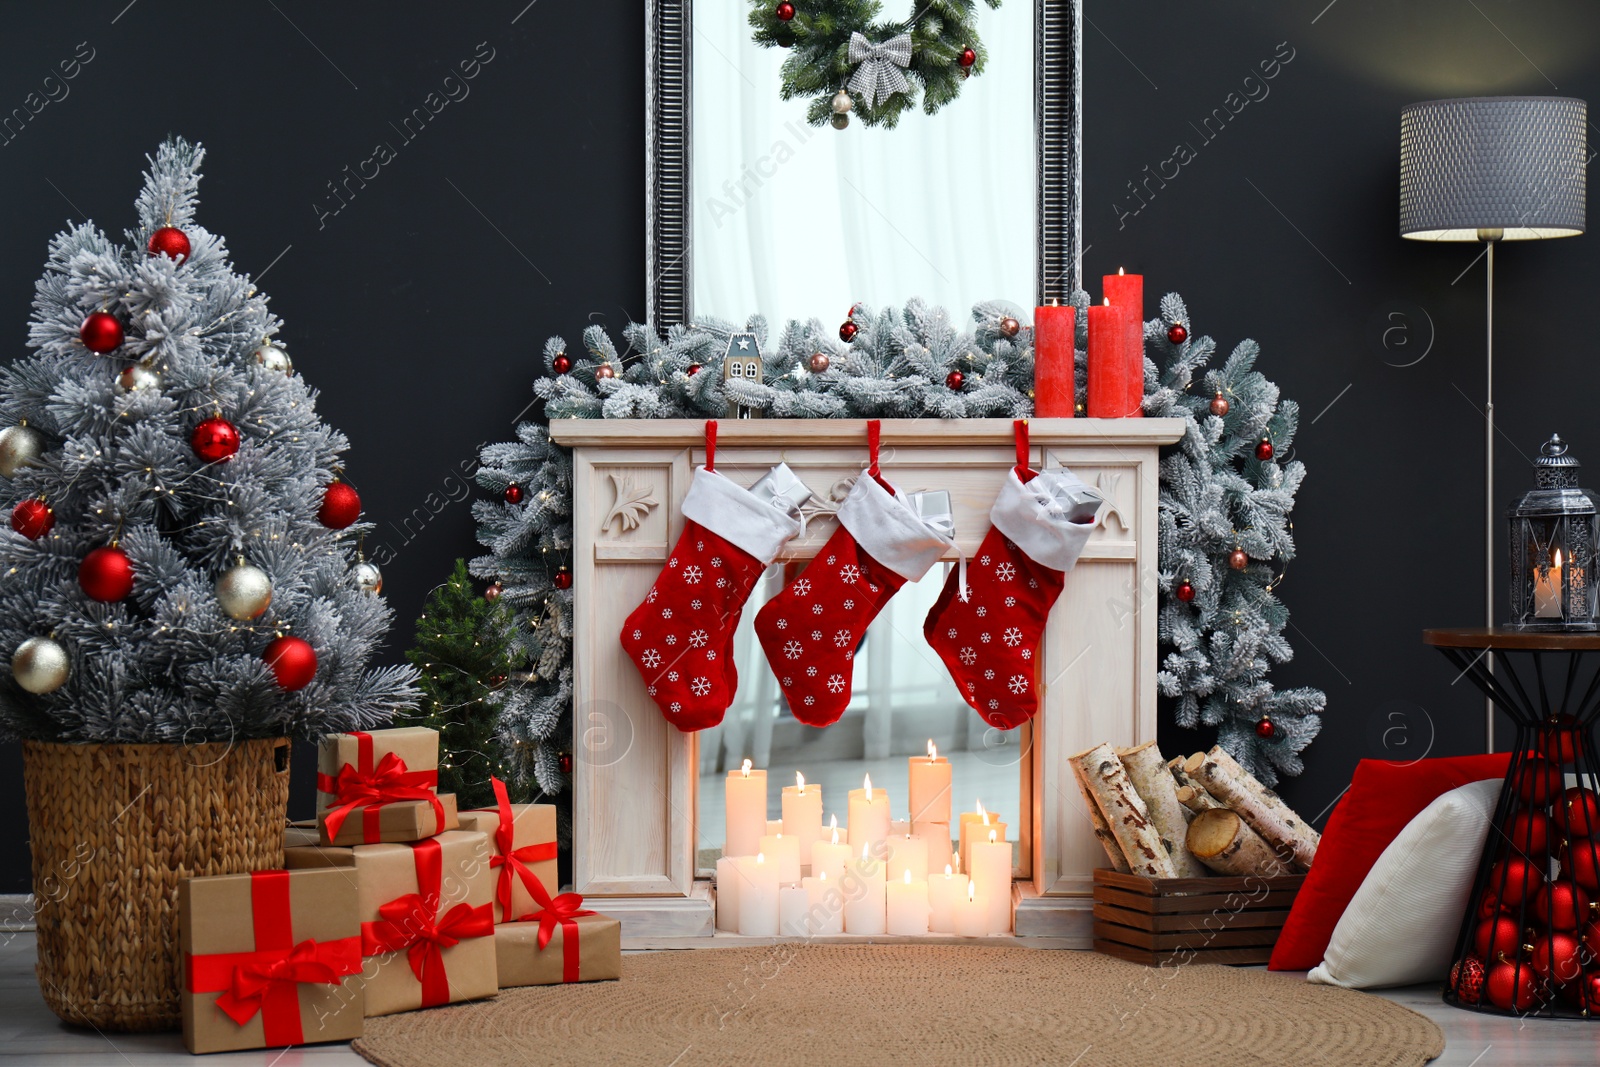 Photo of Fireplace with Christmas stockings in festive room interior